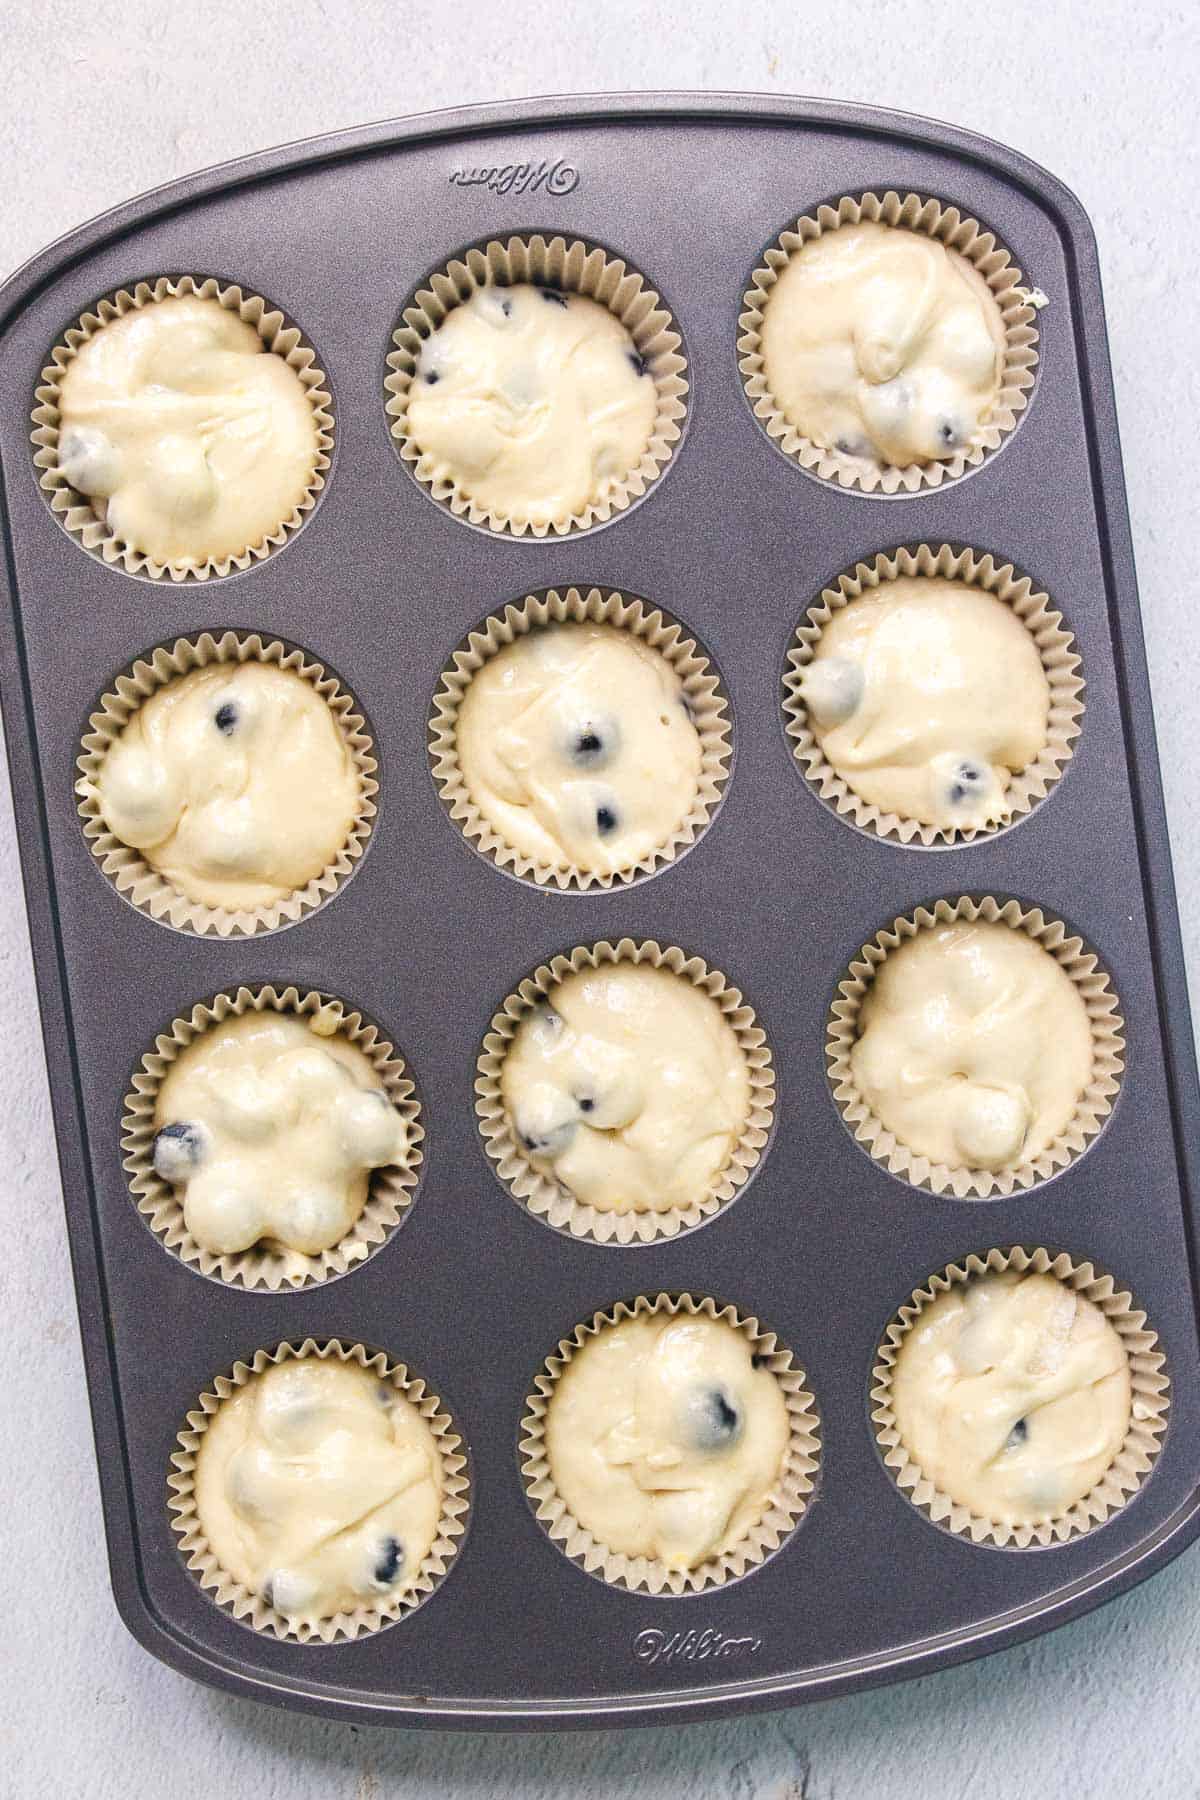 Cake mix blueberry muffin batter in lined muffin tins. Each liner is filled with a half inch of space at the top.